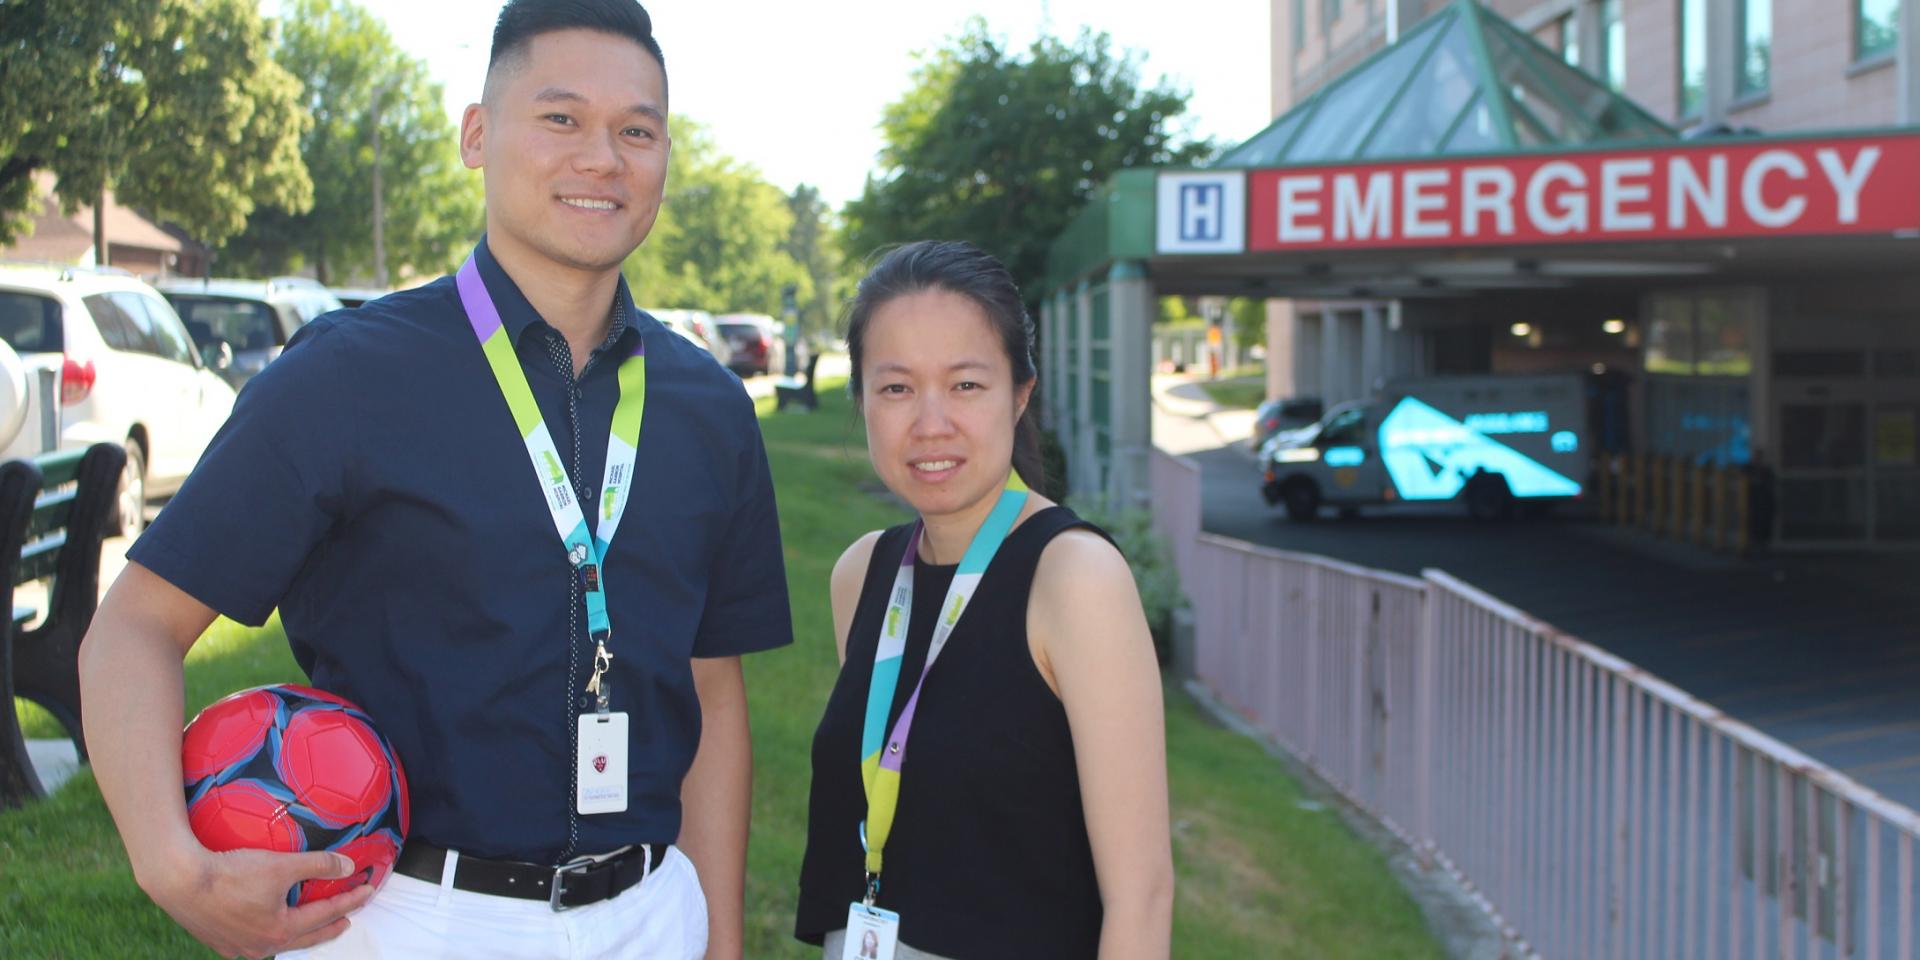 Andrew Liu, Clinical Manager, Pharmacy and Grace Ho, Pharmacist pictured with a soccer ball outside the Michael Garron Hospital Emergency Department